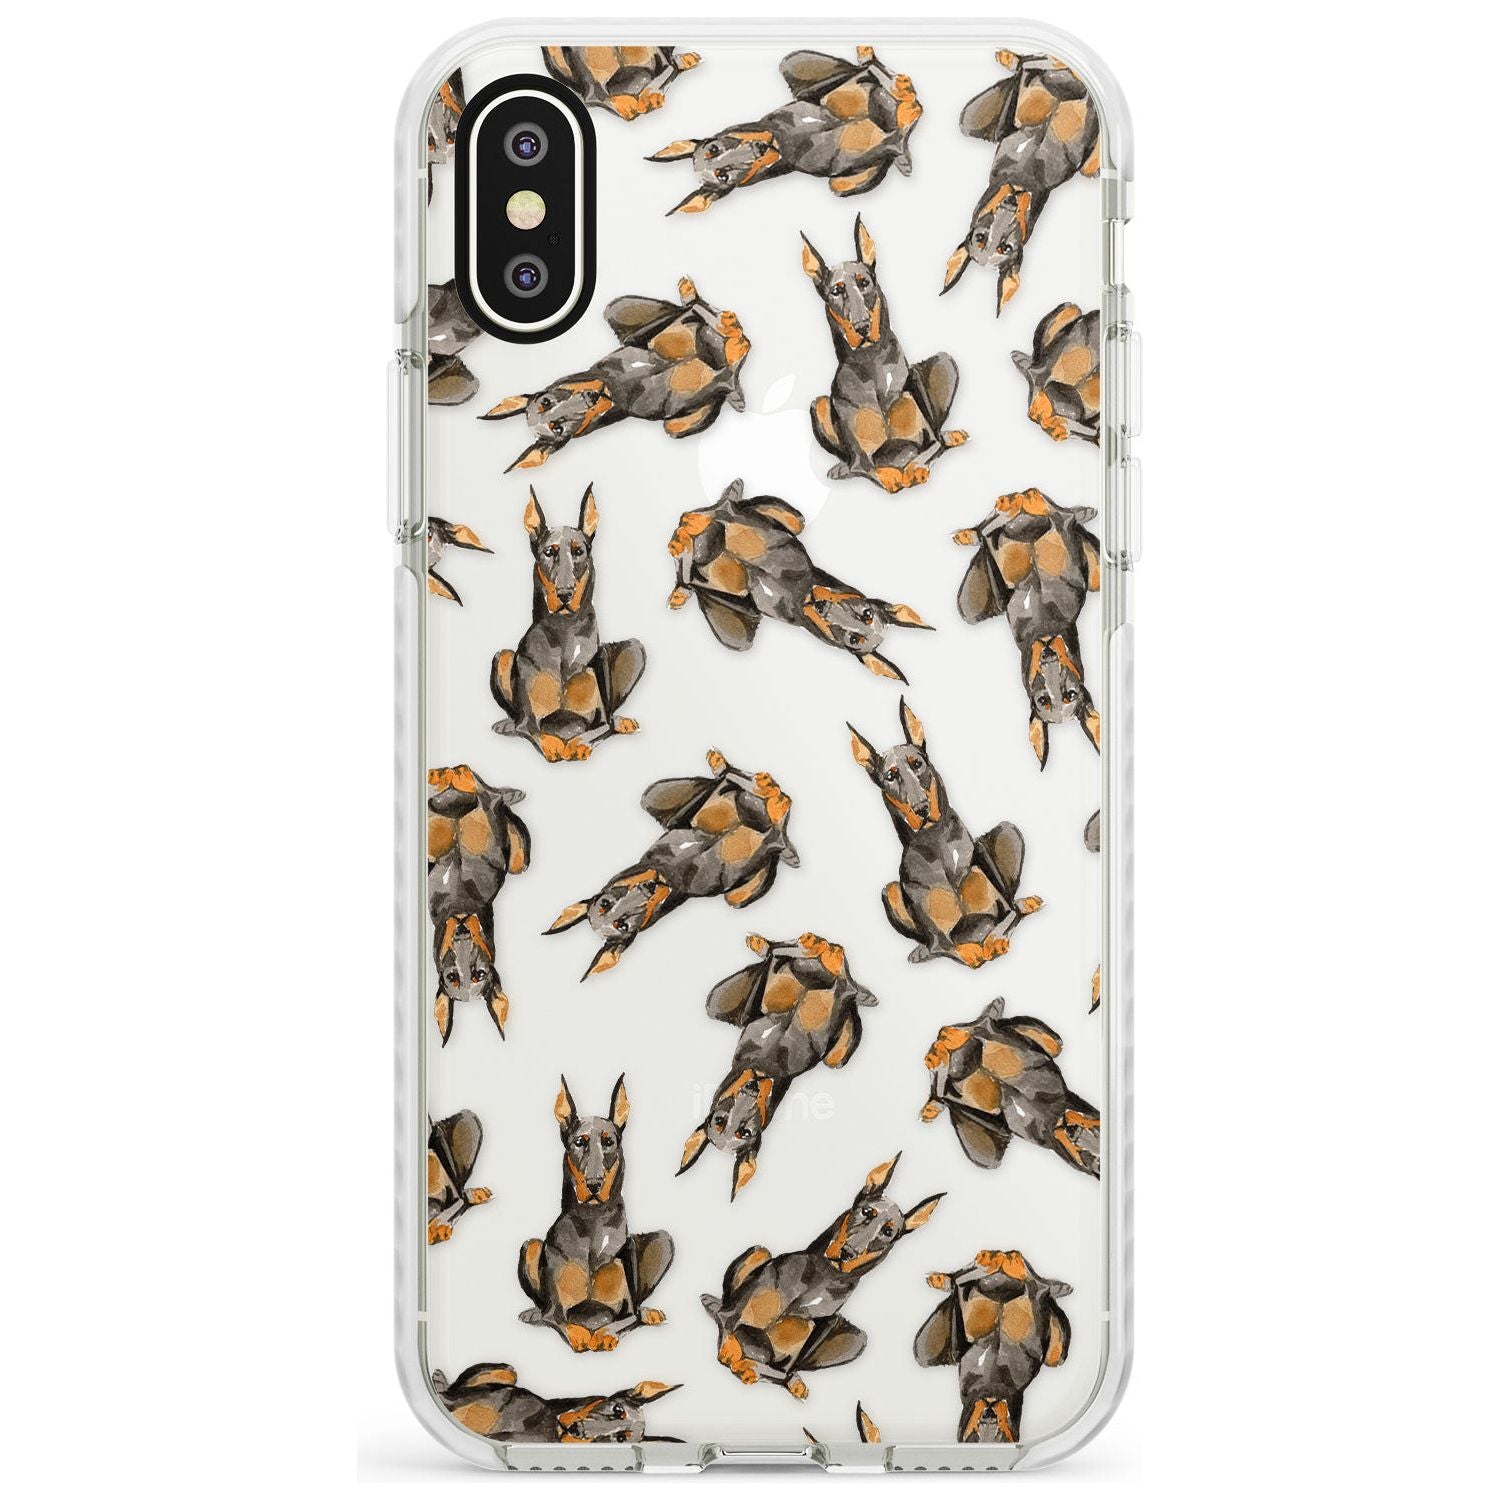 Doberman (Cropped) Watercolour Dog Pattern Impact Phone Case for iPhone X XS Max XR